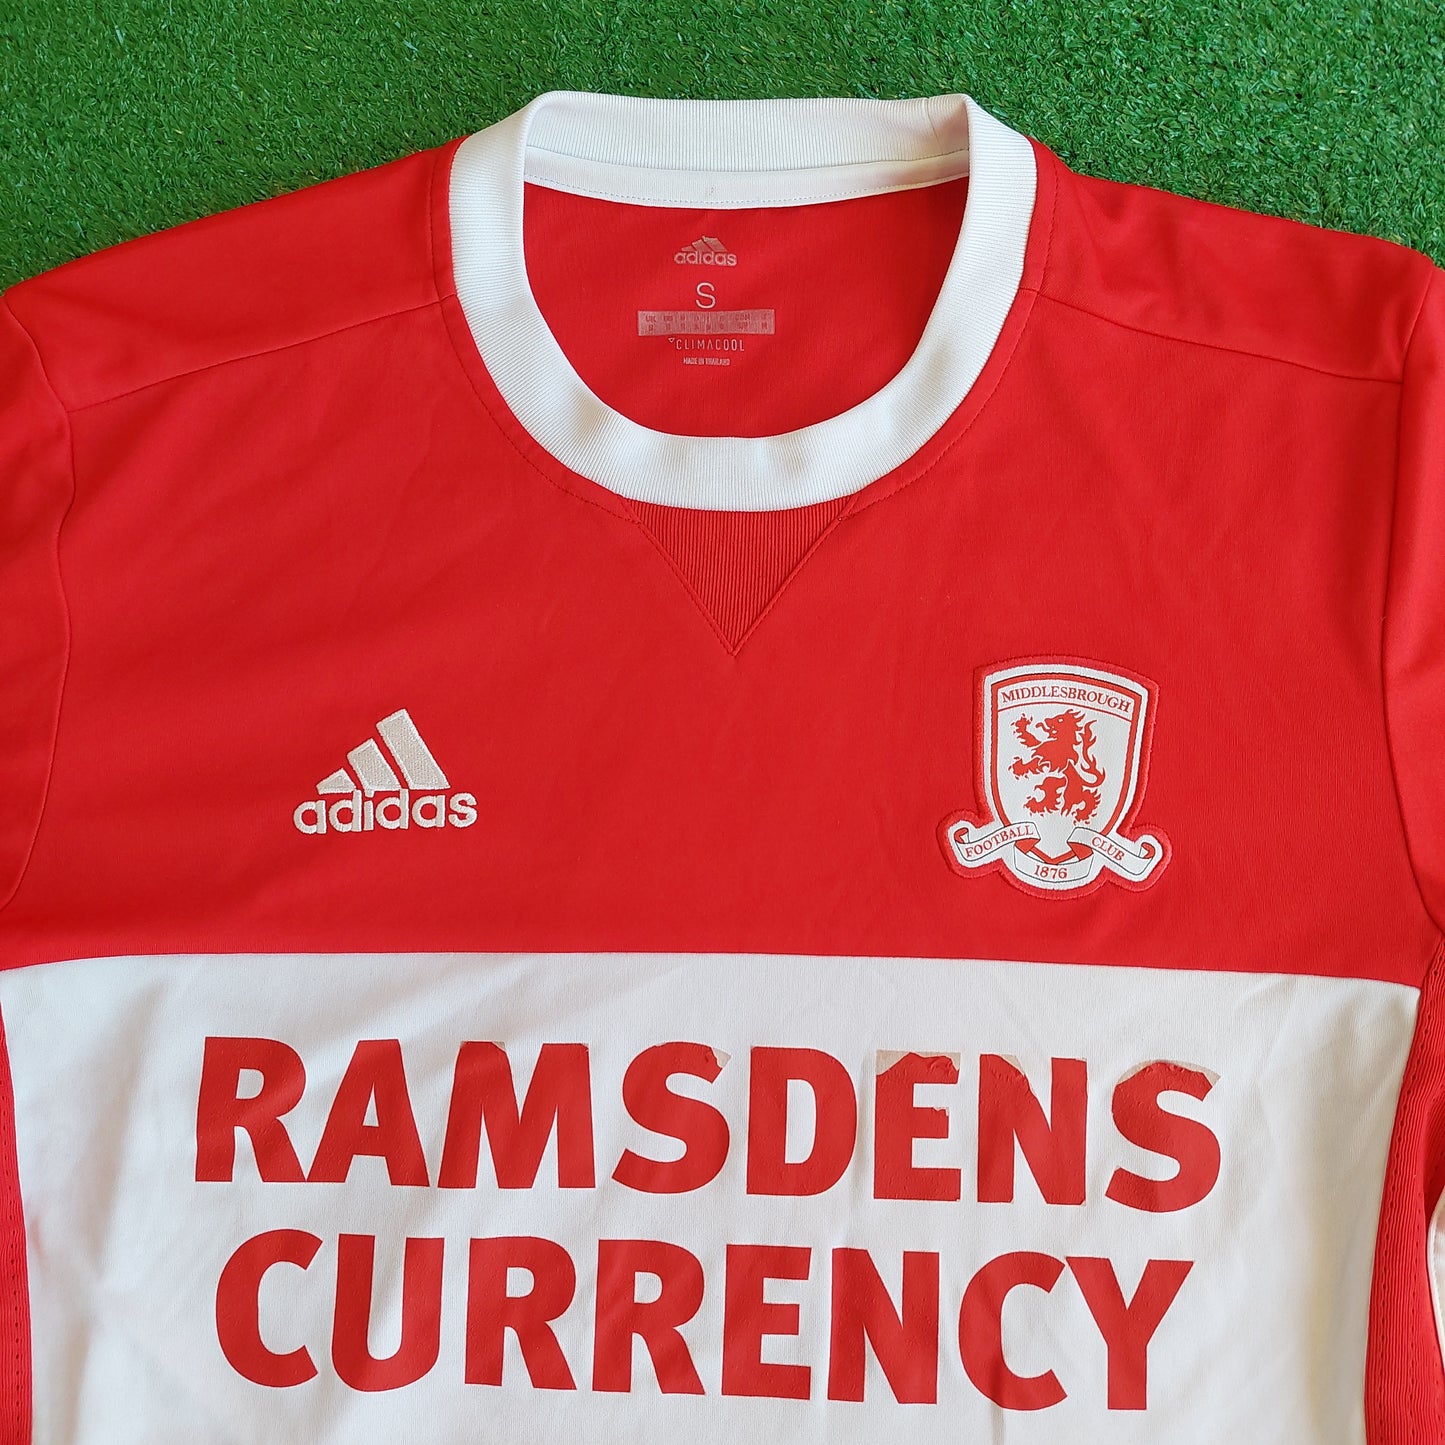 Middlesbrough 2017/18 Home Shirt (Very Good) - Size S